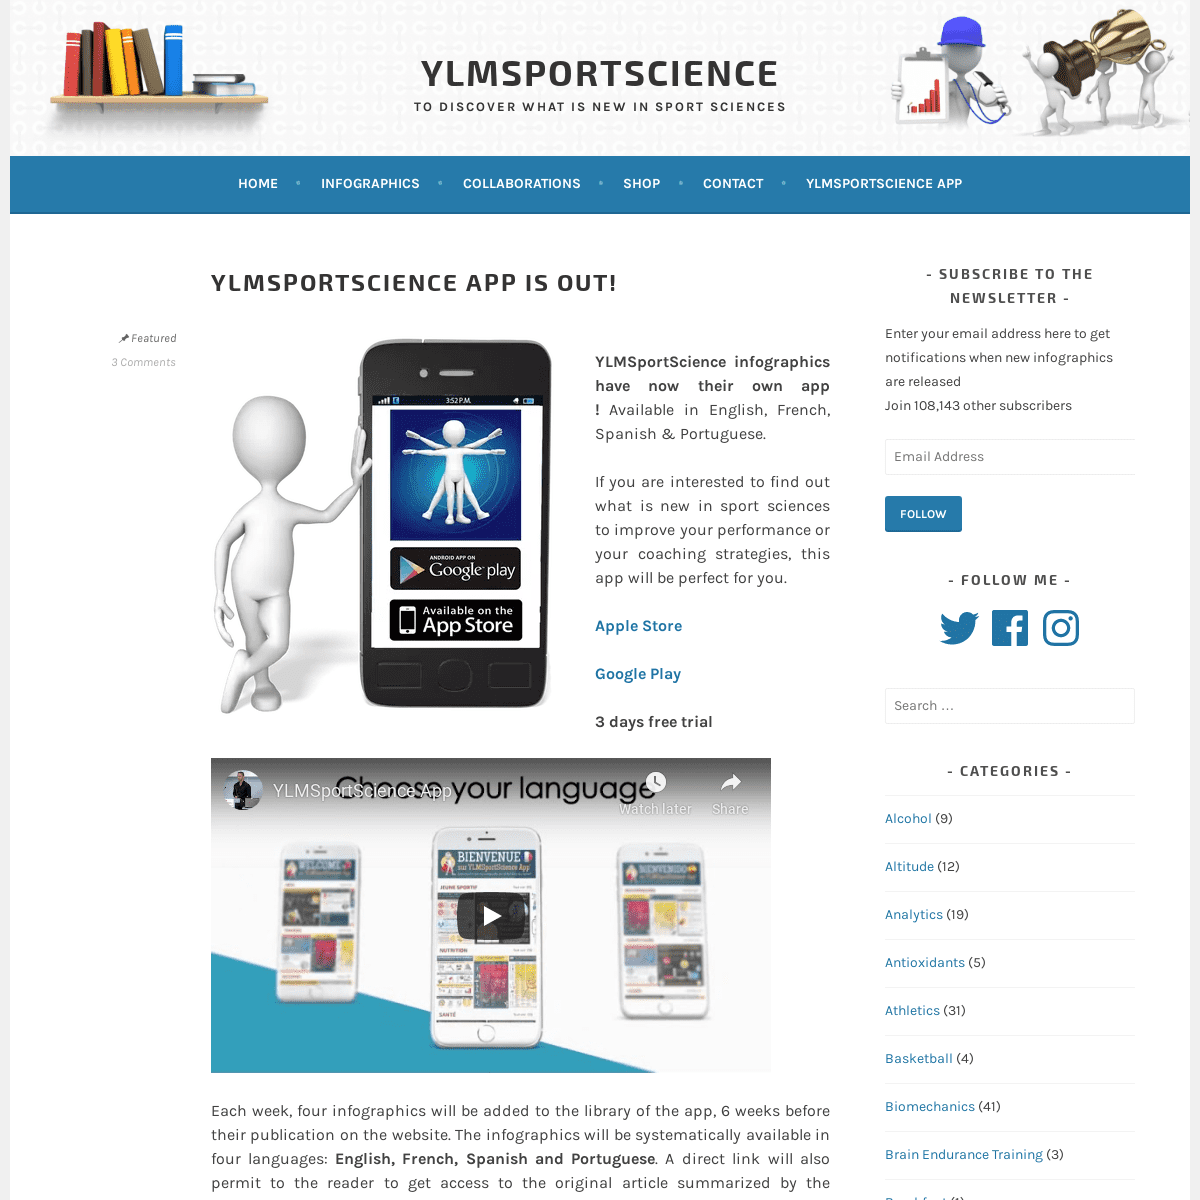 YLMSportScience – To Discover What is New in Sport Sciences